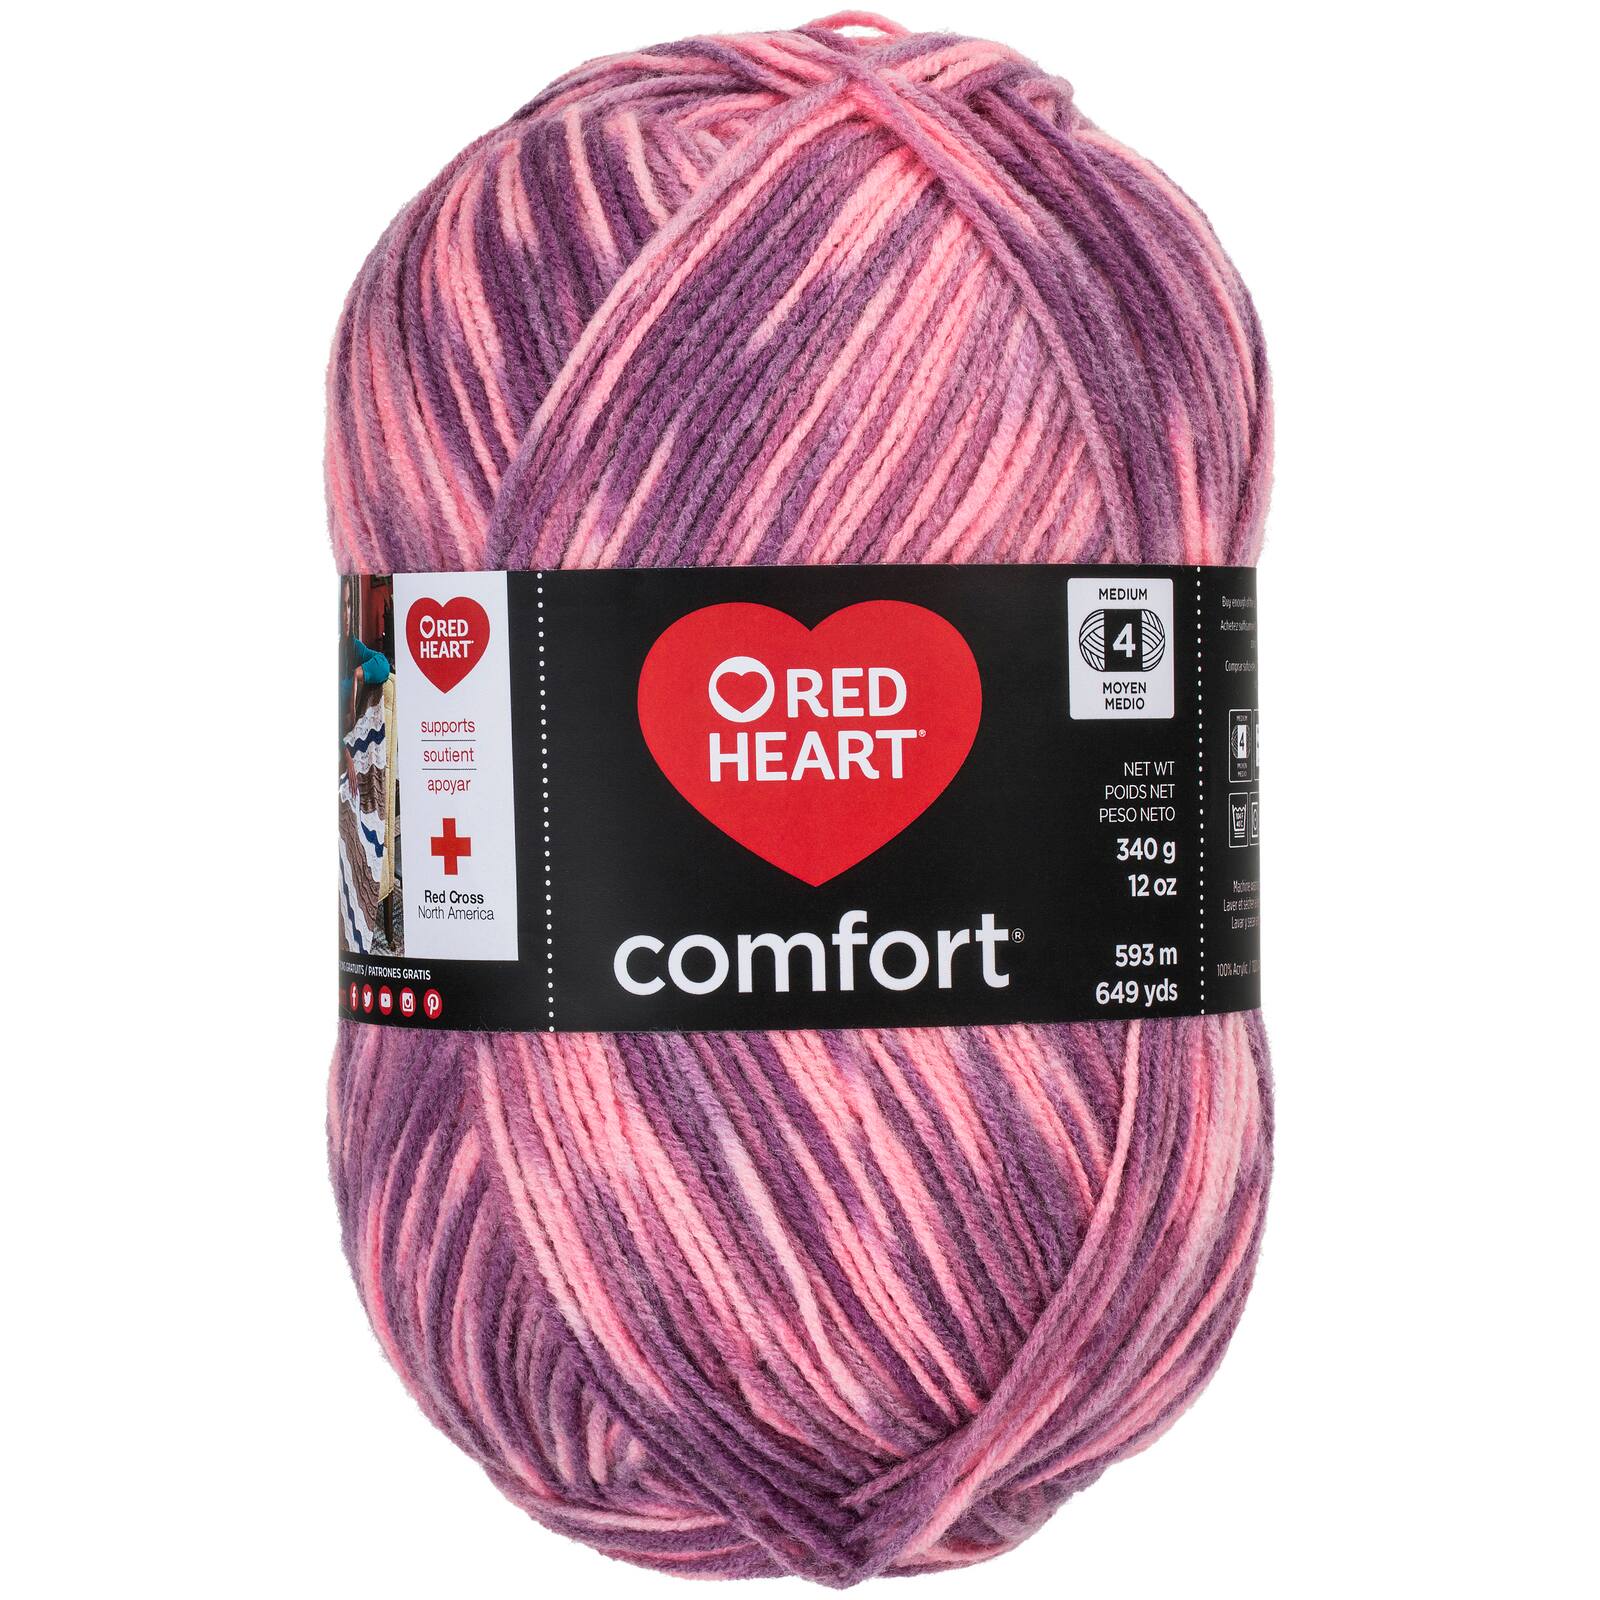 Buy The Red Heart® Comfort Yarn Multicolor At Michaels